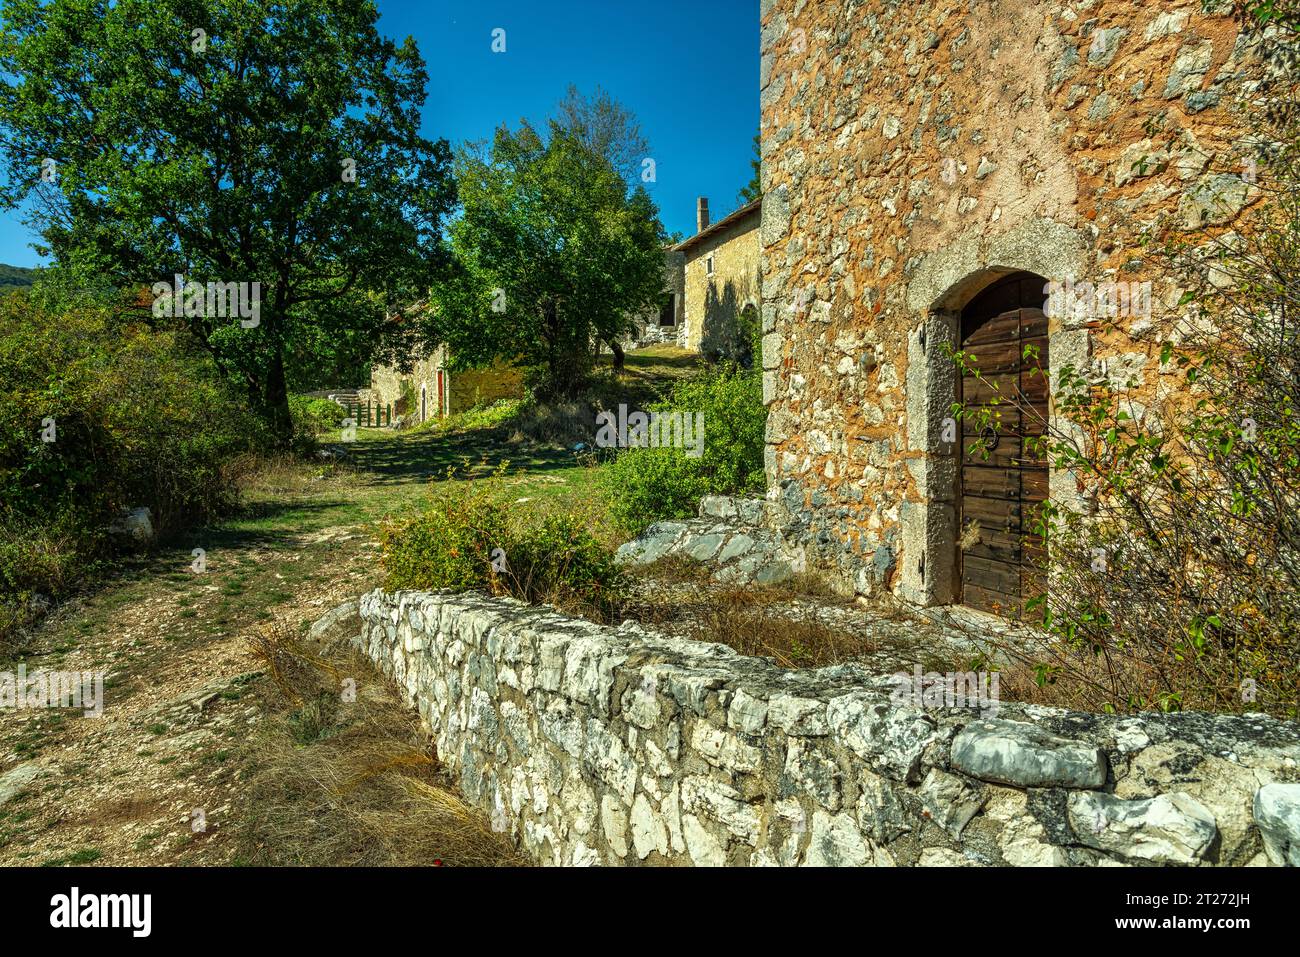 Ancient agricultural-pastoral mountain communities. Old stone houses. Pagliare di Fontecchio, province of L'Aquila, Abruzzo, Italy, Europe Stock Photo